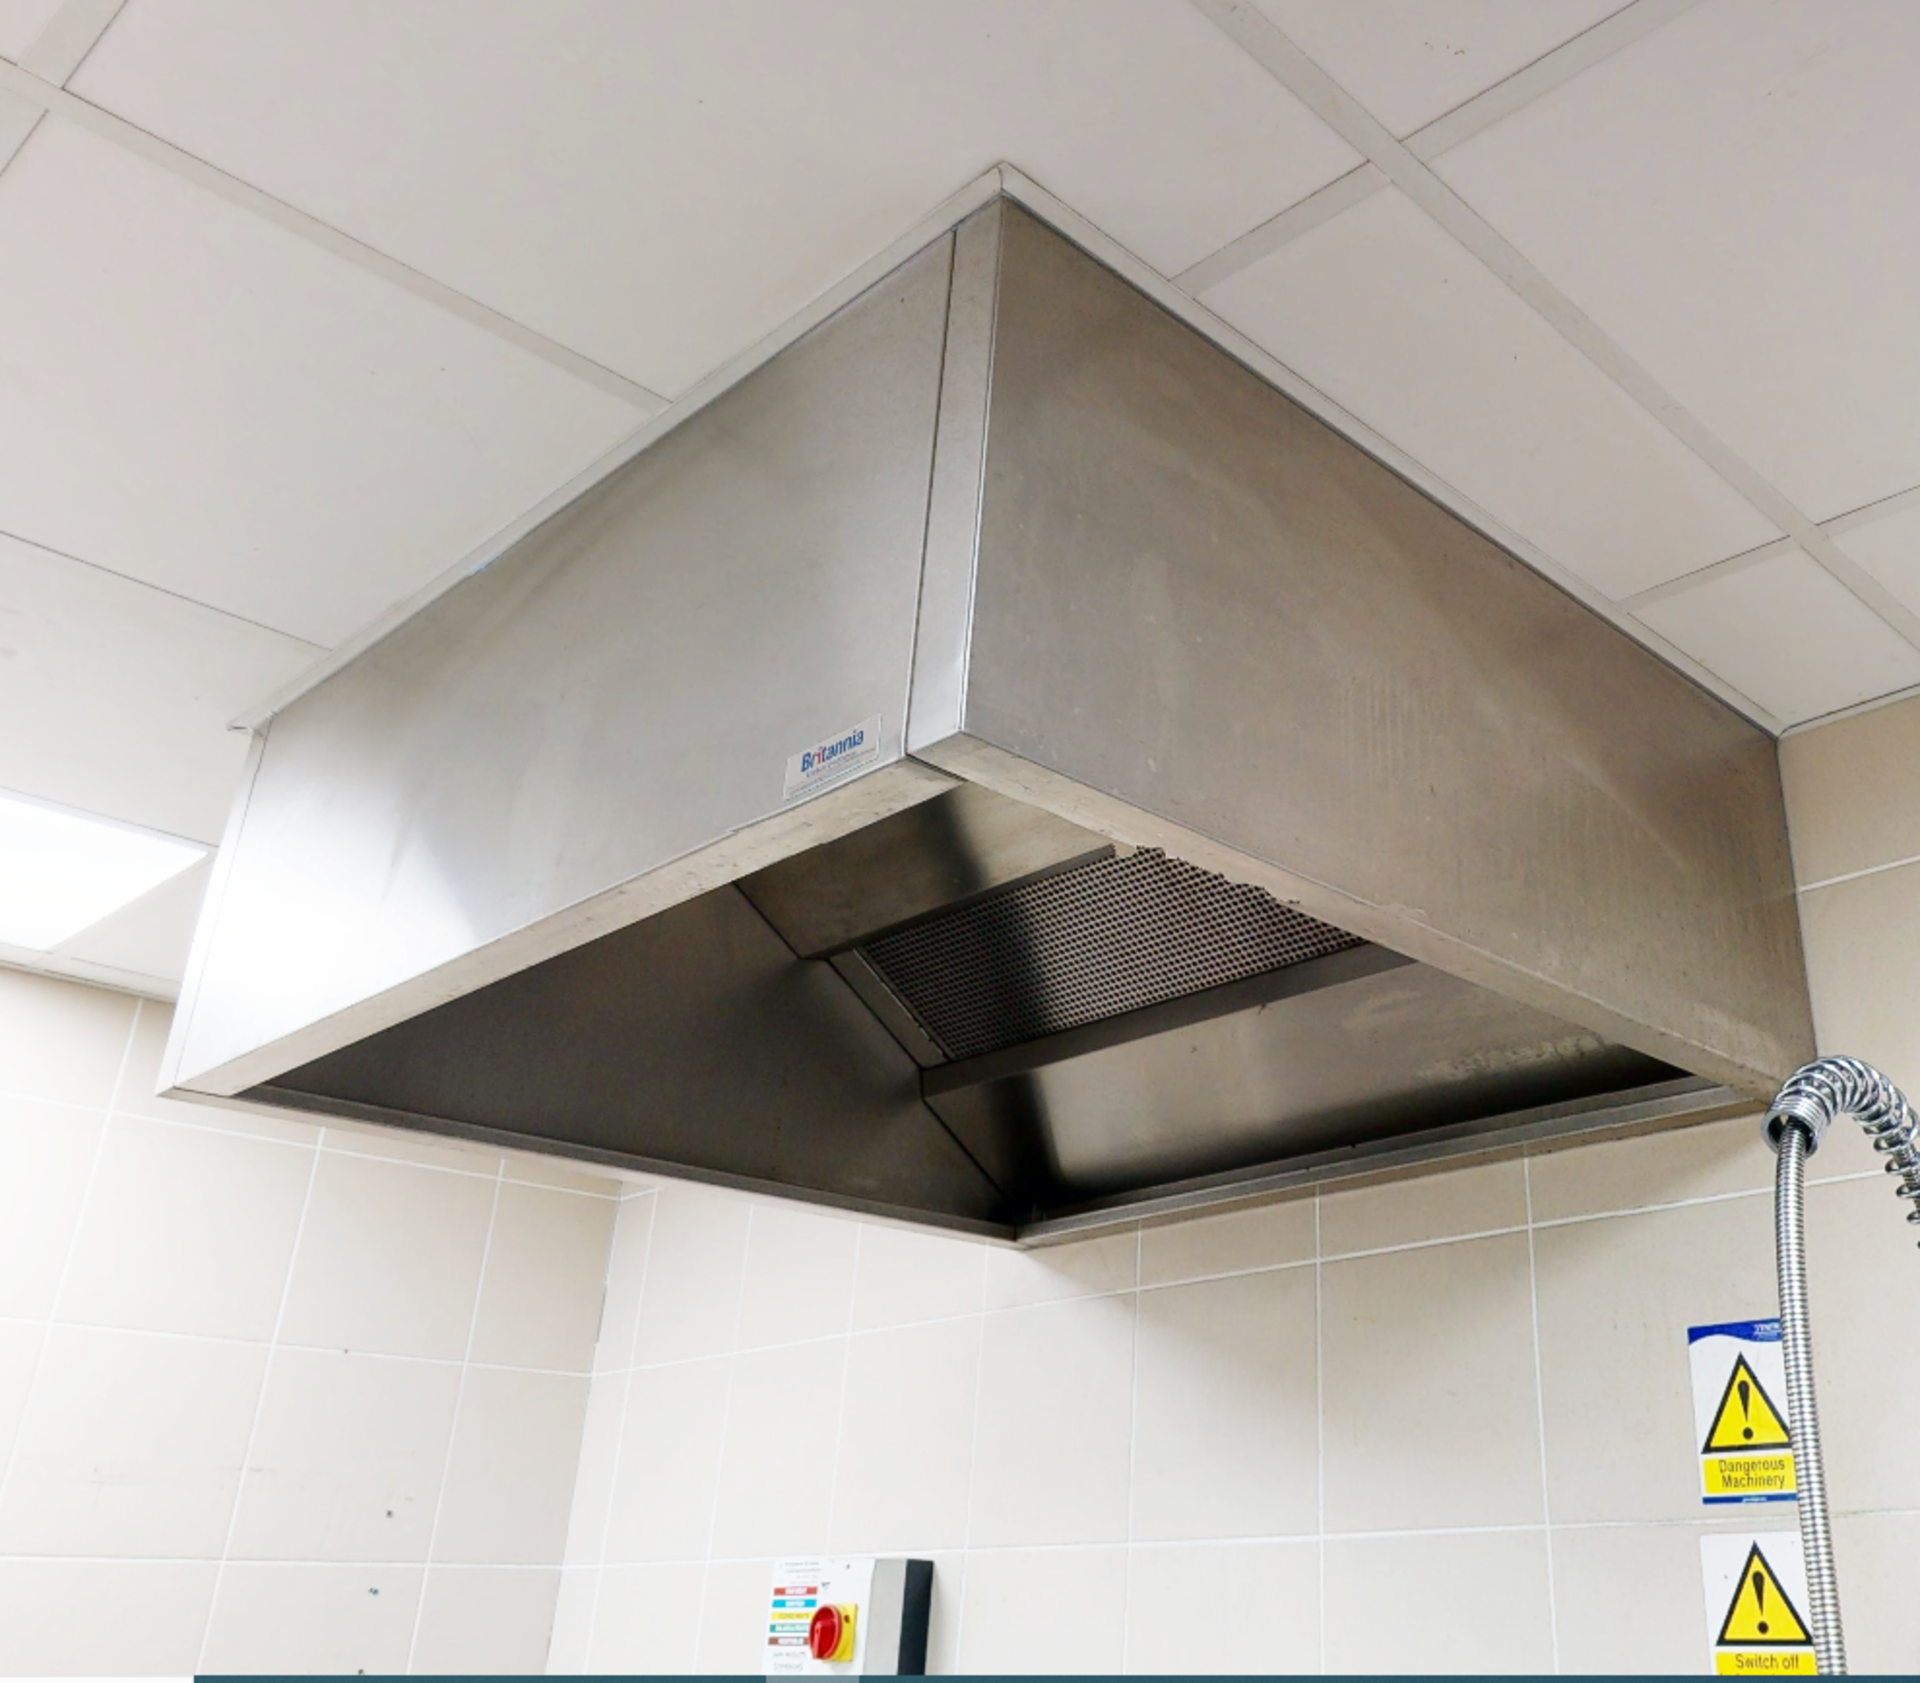 1 x Commercial Stainless Steel Extraction Canopy - CL701 - Location: Ashton Moss, Manchester, OL7 - Image 7 of 8